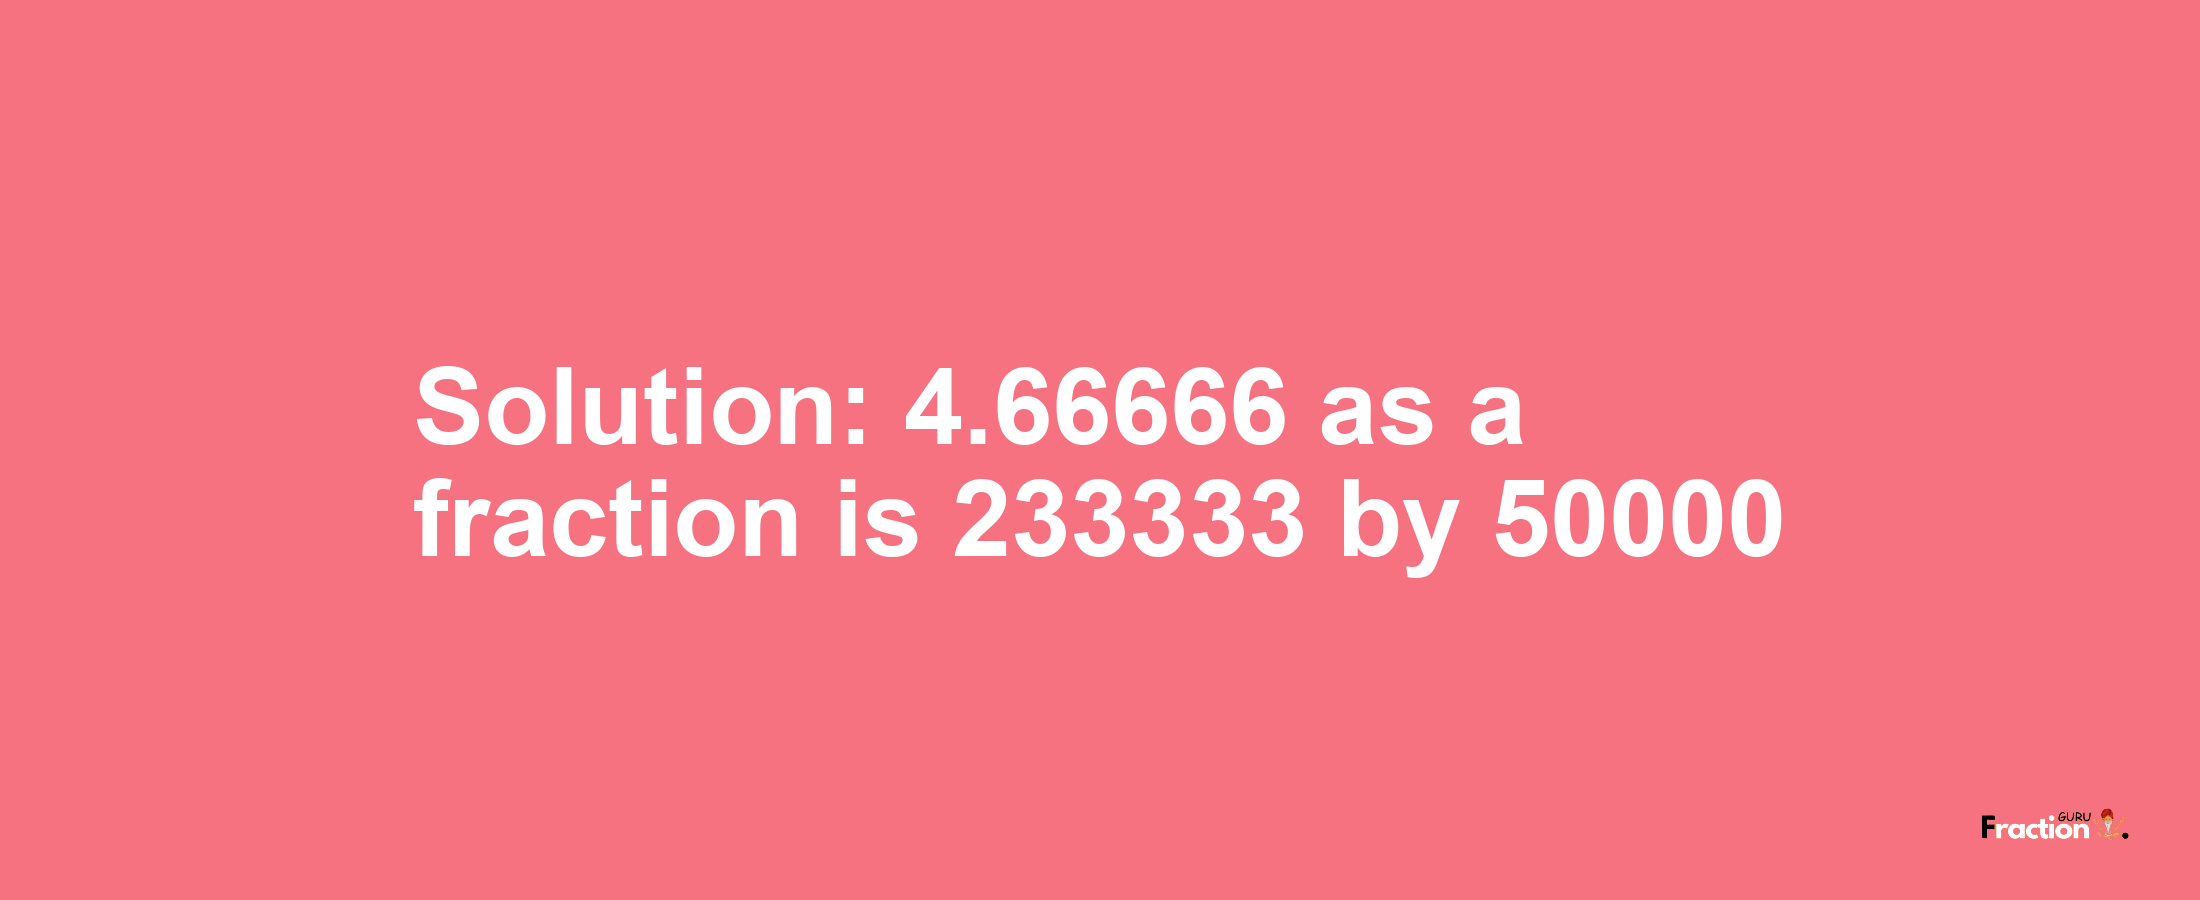 Solution:4.66666 as a fraction is 233333/50000